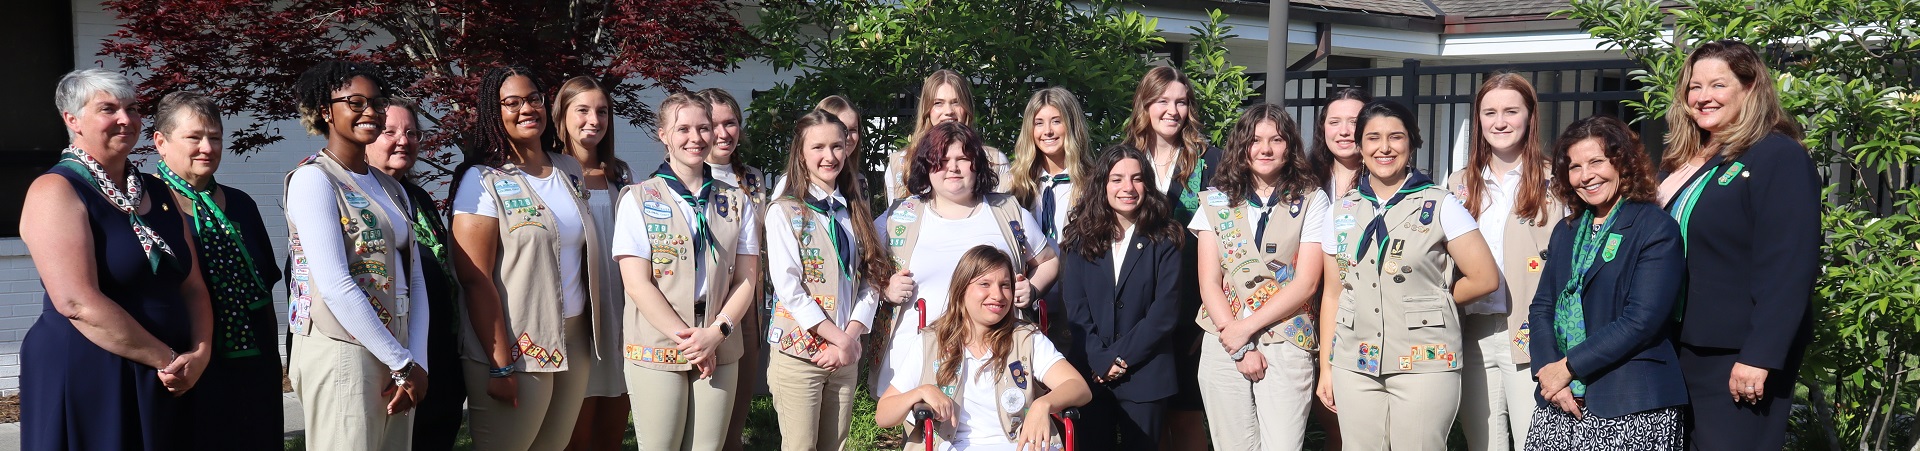  Gold Award Girl Scouts with GSCCC Gold Award Committee members outdoors at awards event  